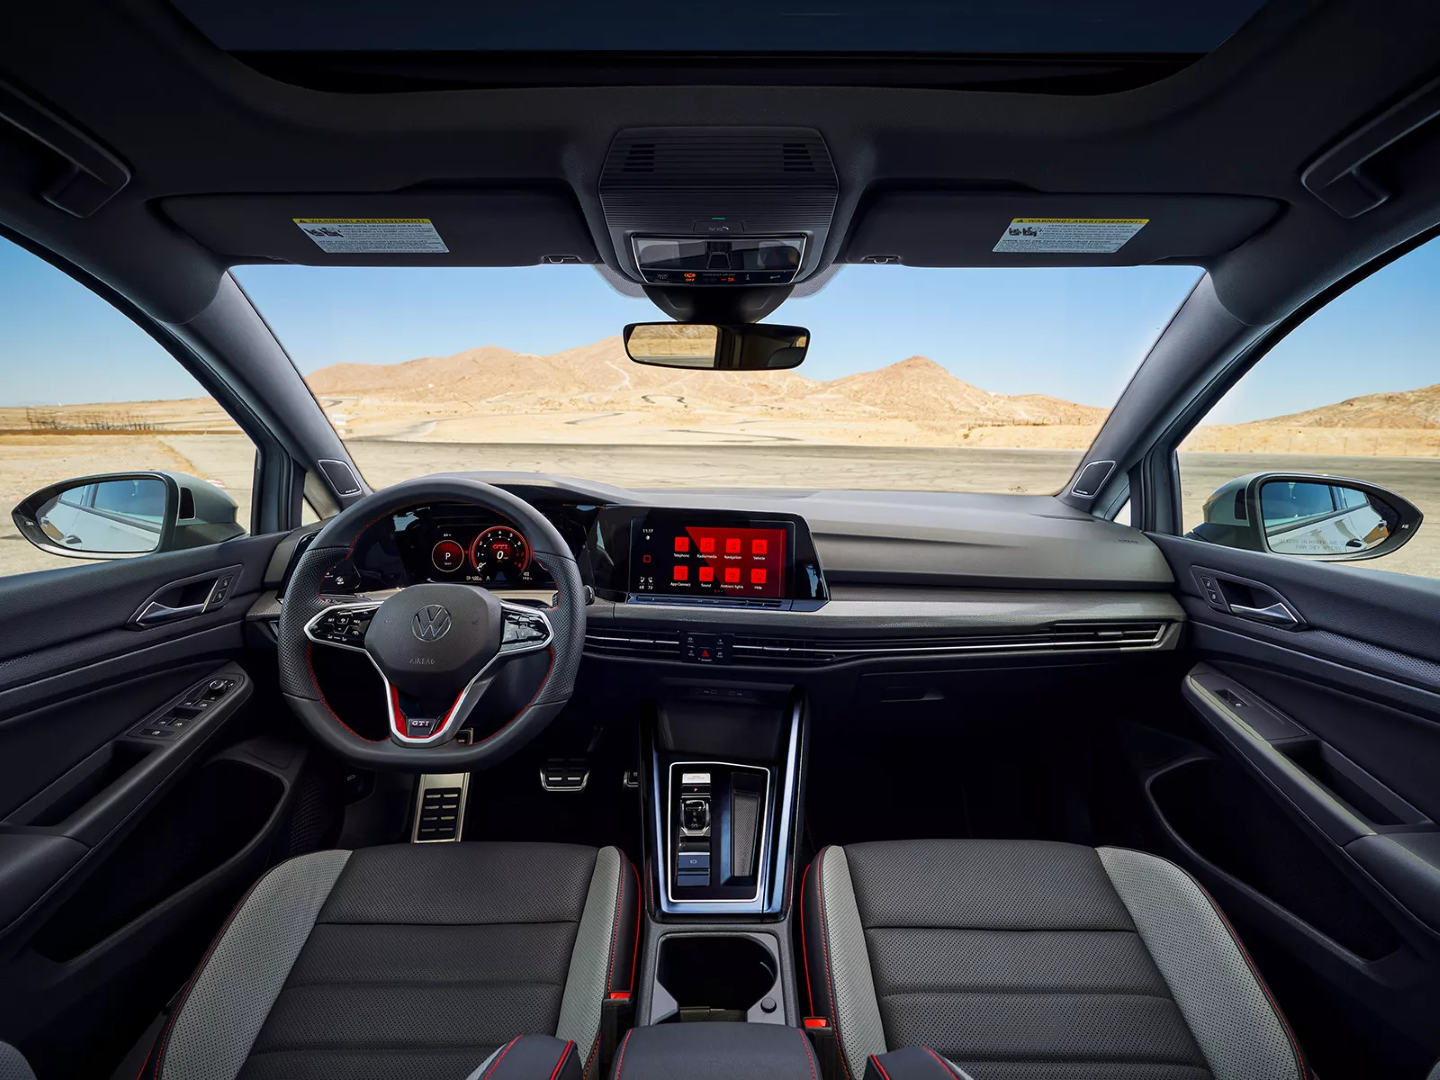 2023 VW Golf GTI driver assistance and media technology